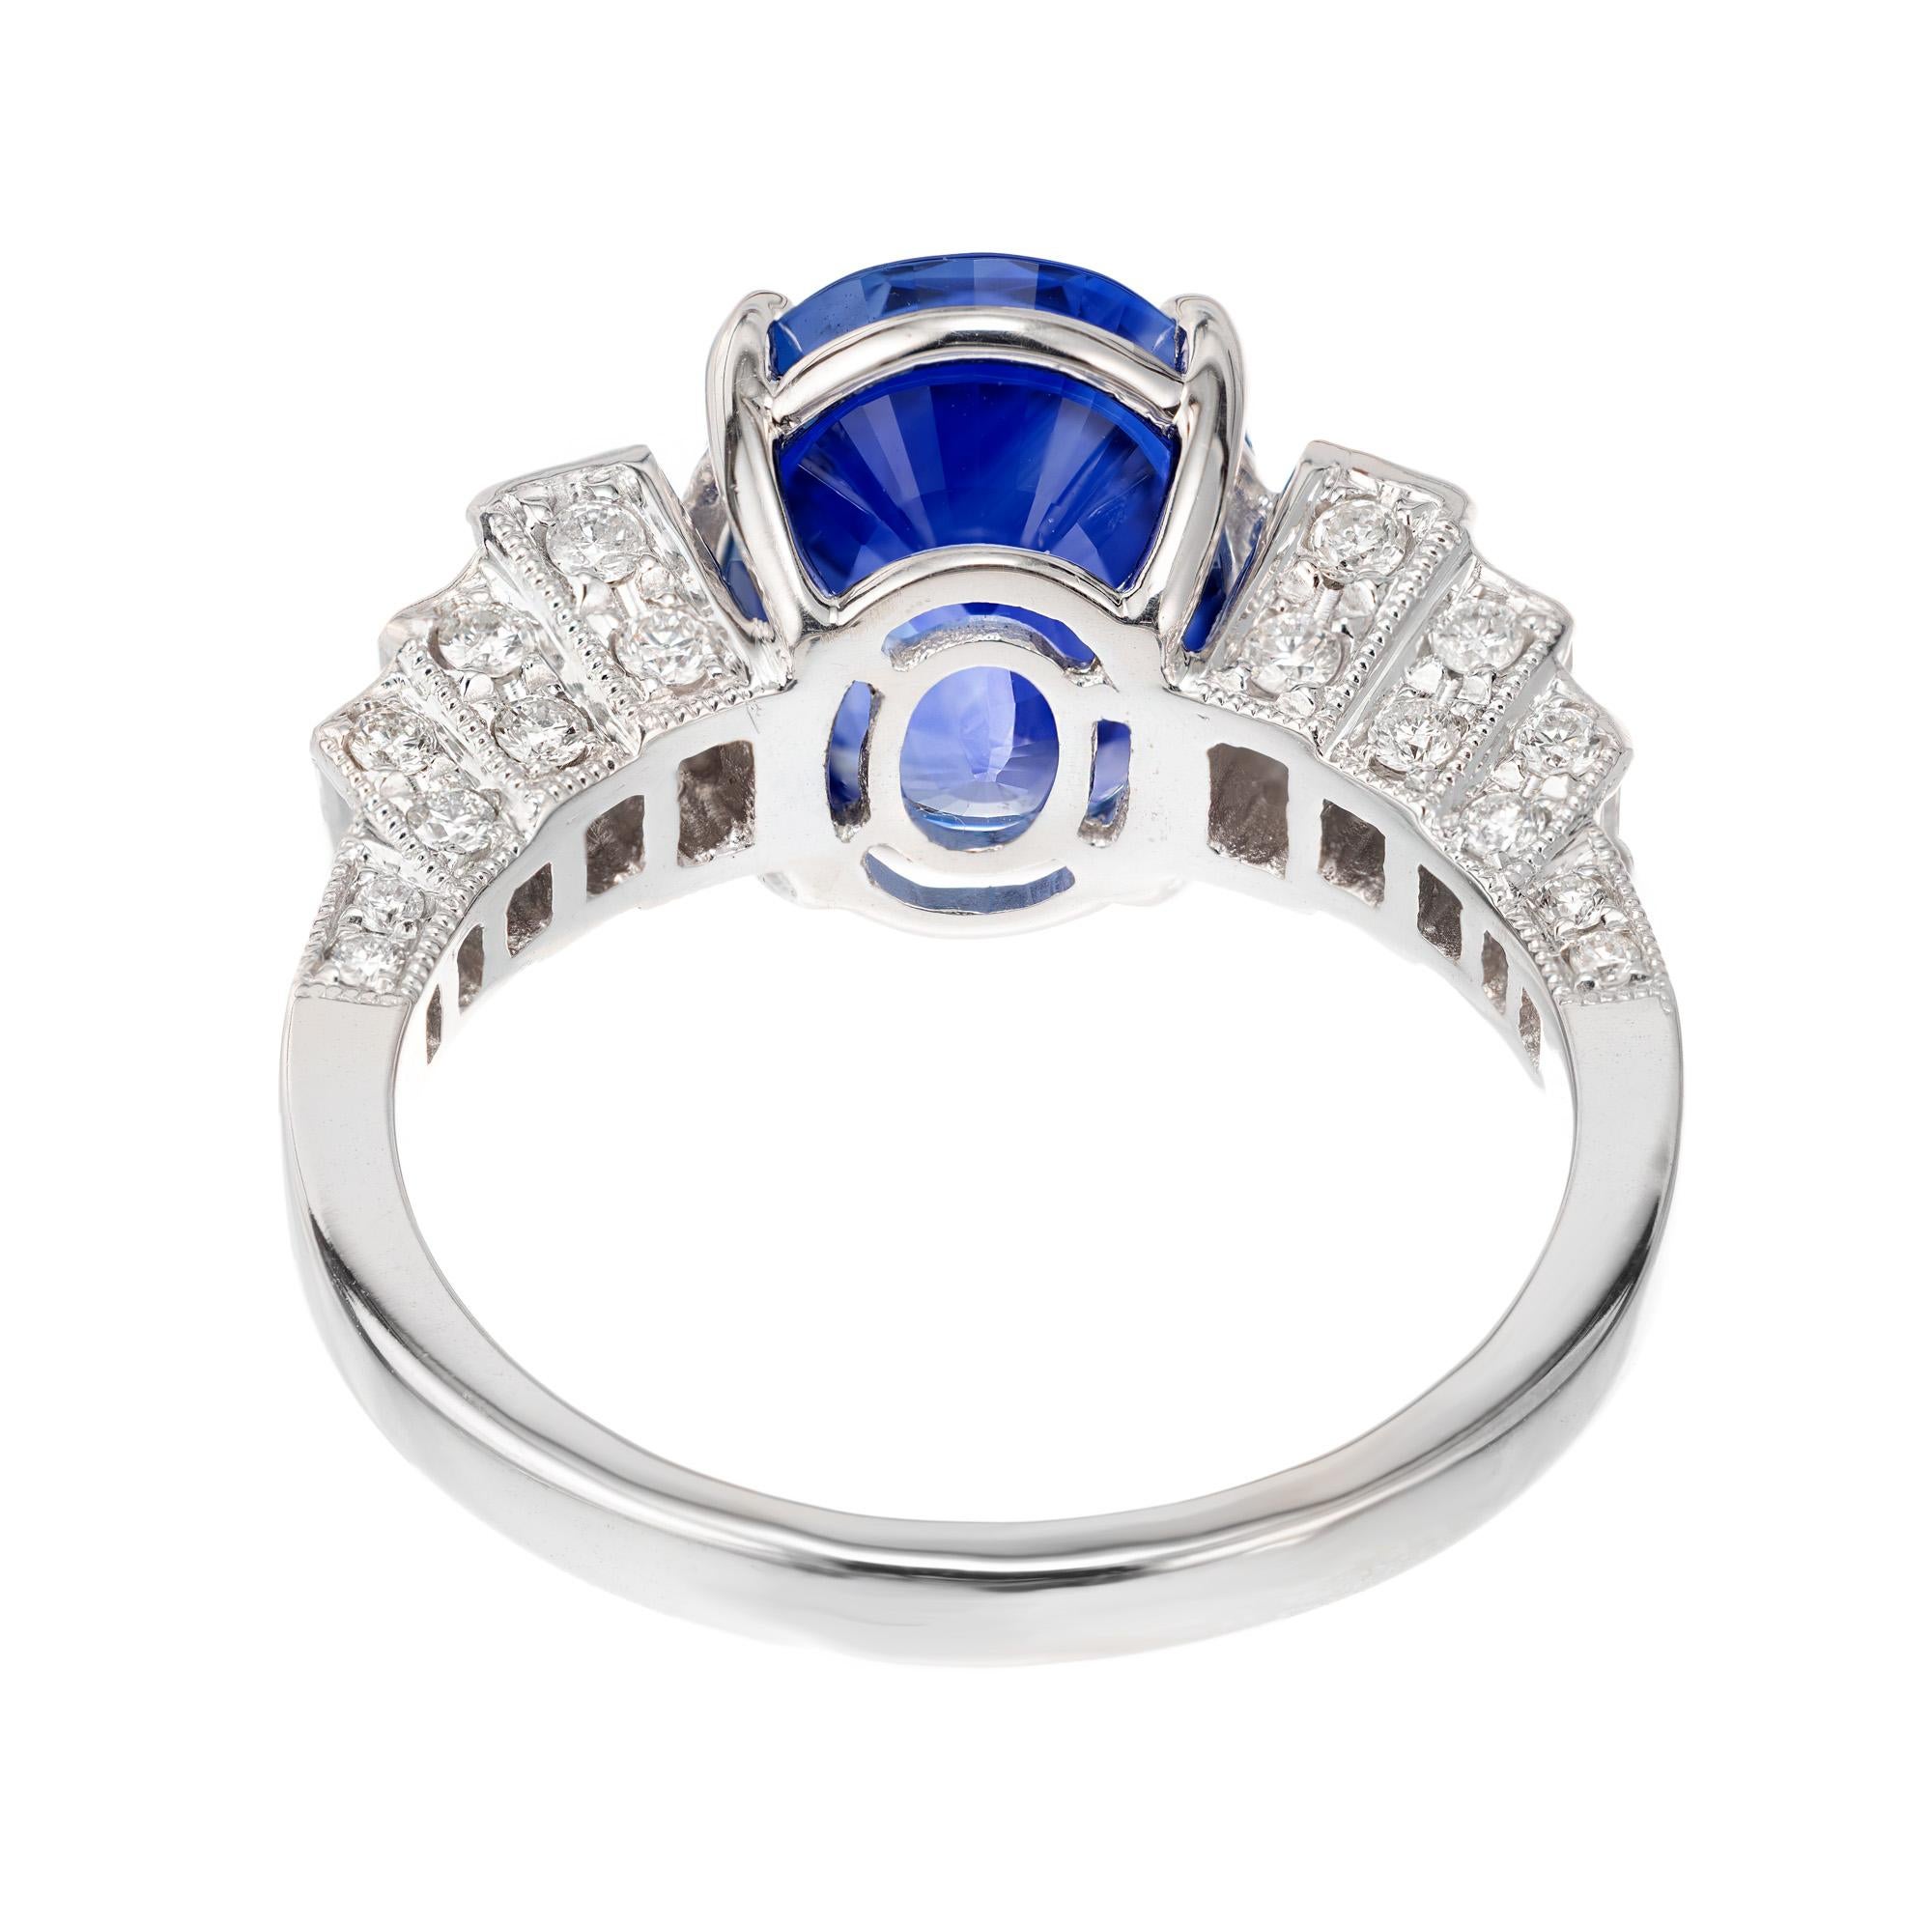 GIA Certified 4.83 Carat Sapphire Diamond White Gold Engagement Ring In New Condition For Sale In Stamford, CT